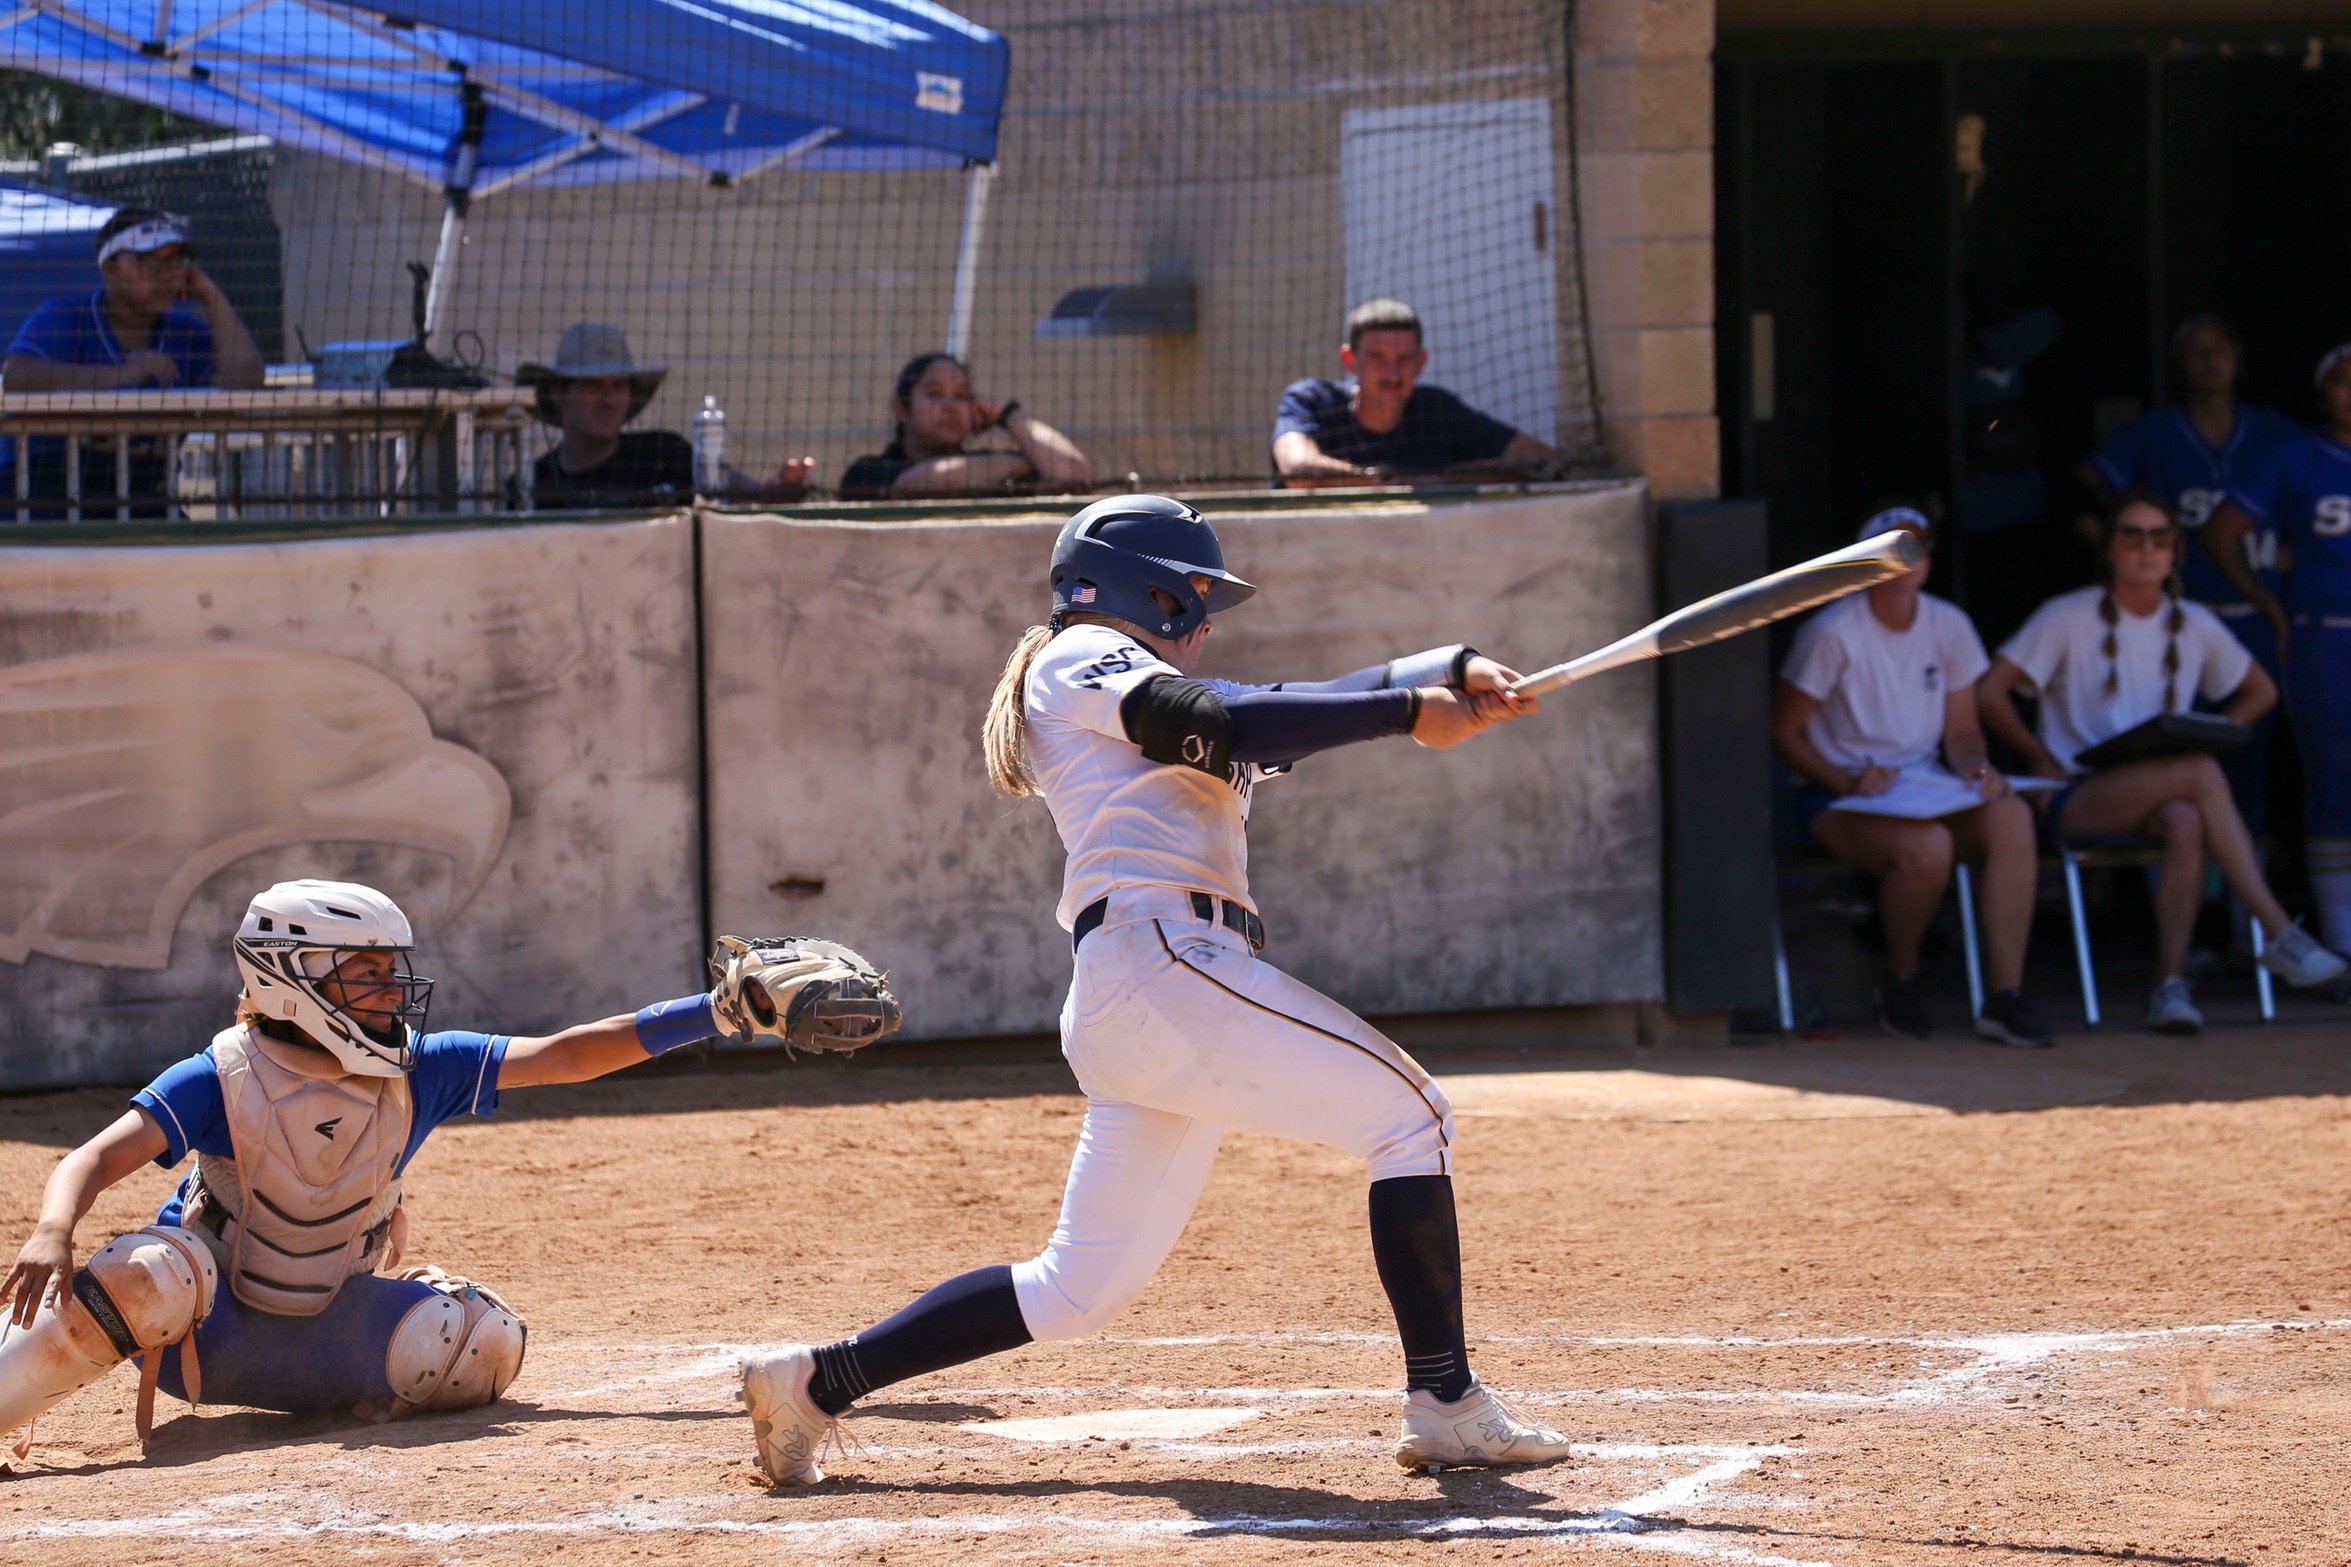 College of the Canyons softball vs. Santiago Canyon on May 7, 2022.